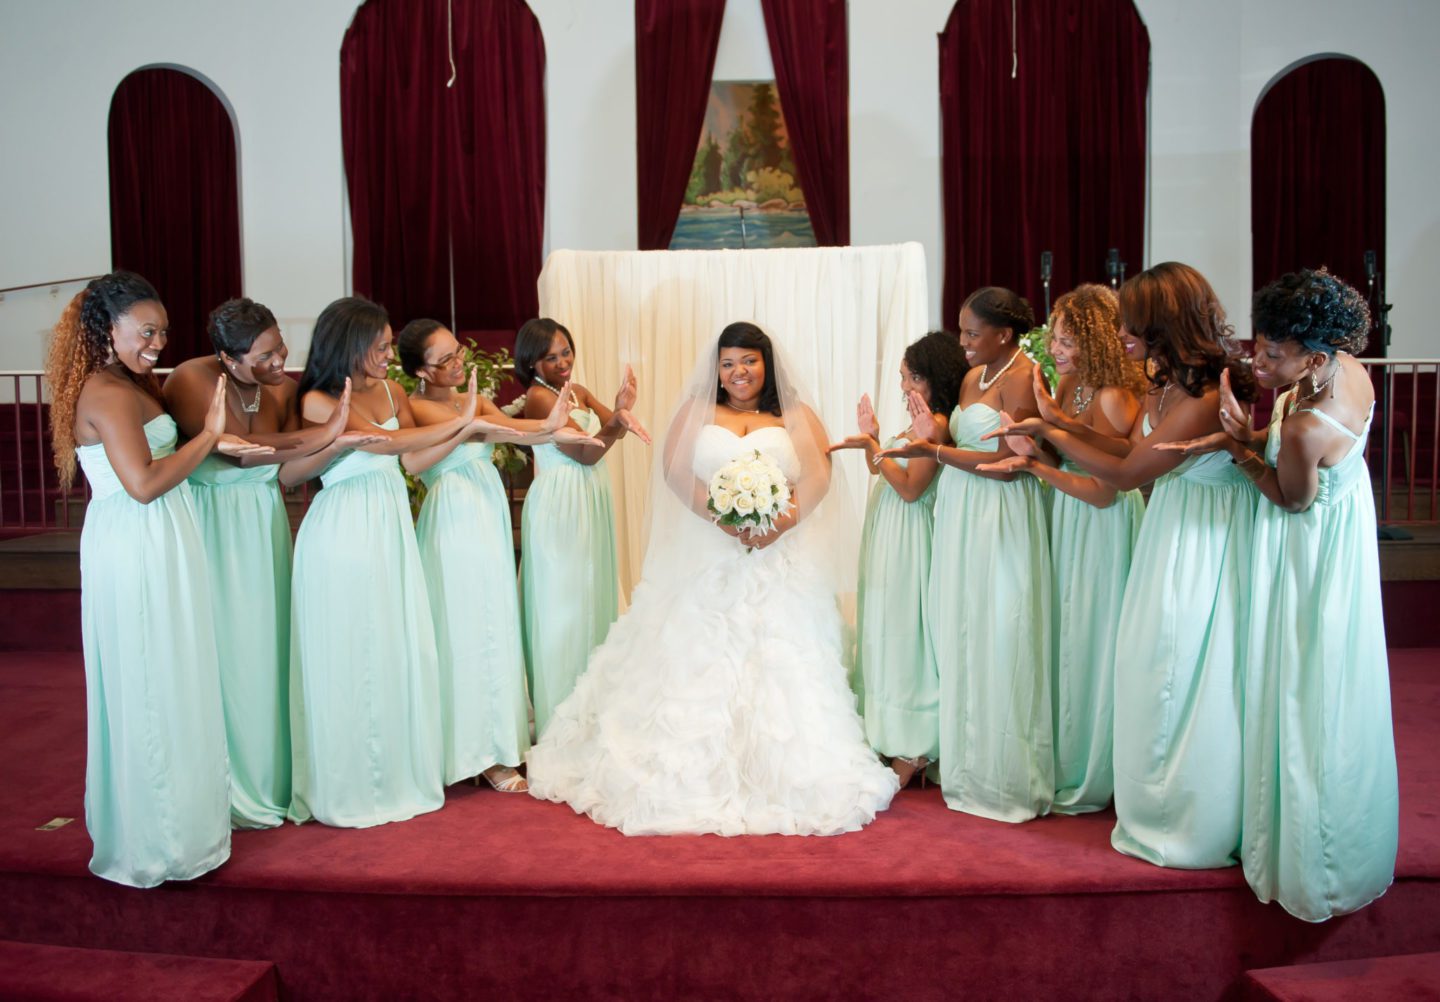 Kentucky College Sweethearts Tie the Knot 32